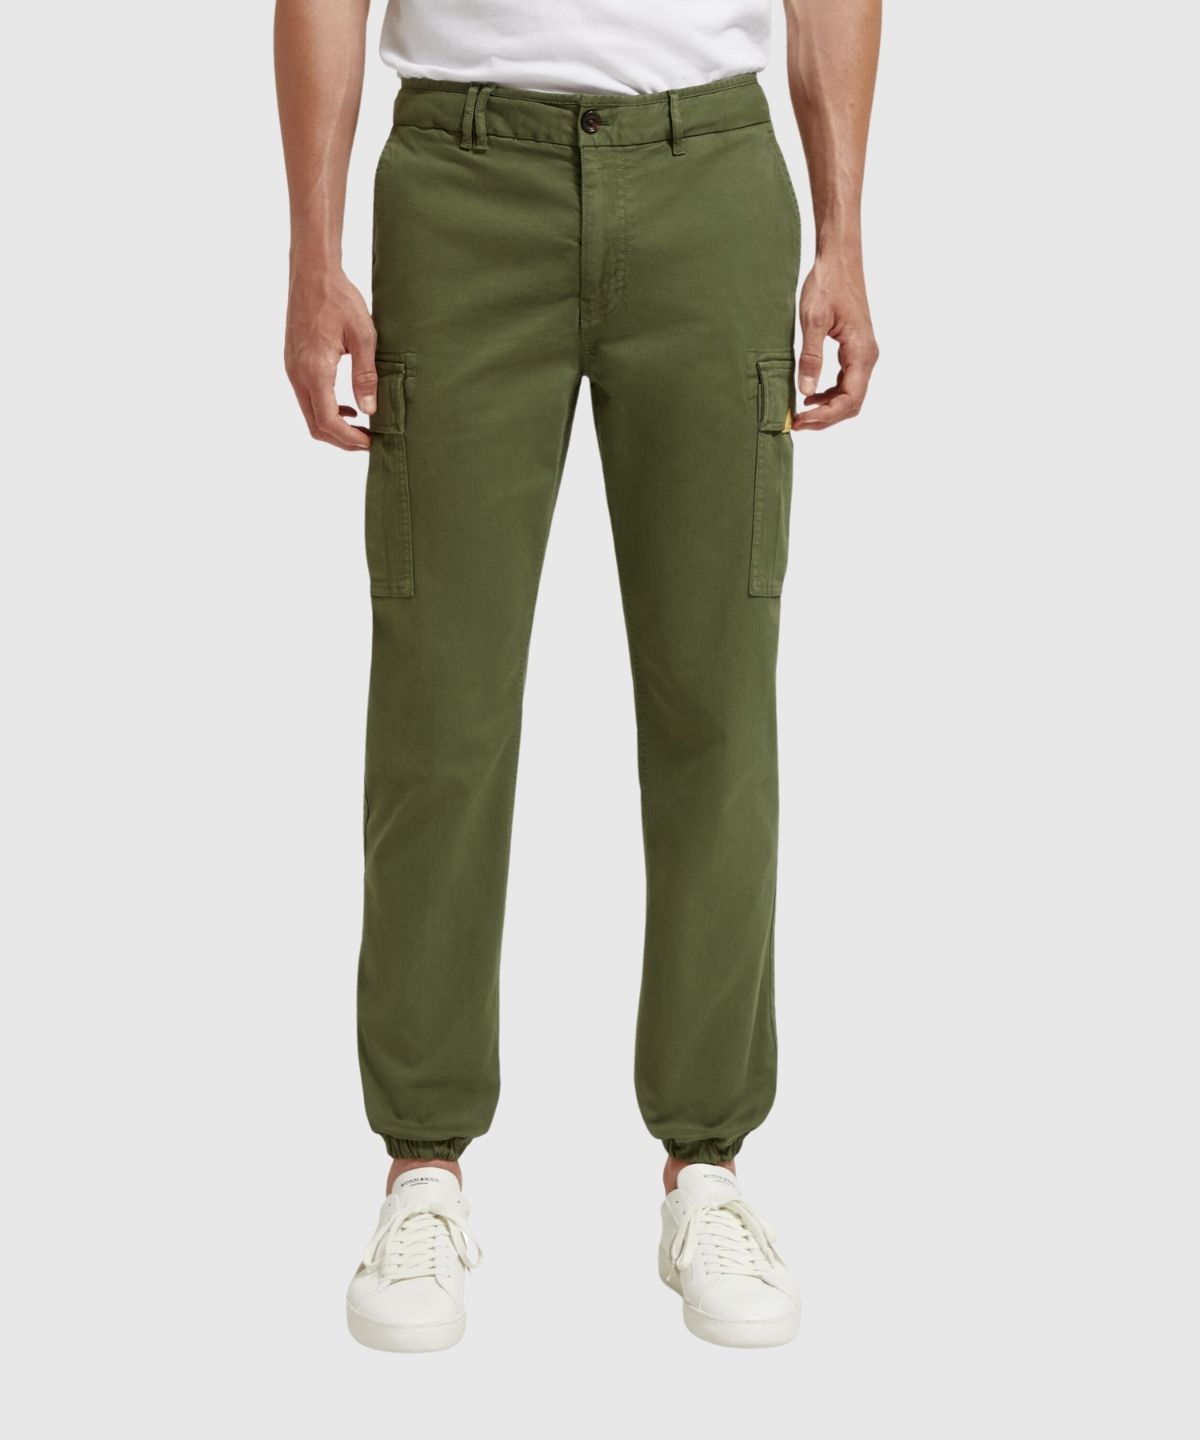 Stuart - Slim-Fit washed structured cargo pants - Maxx Group